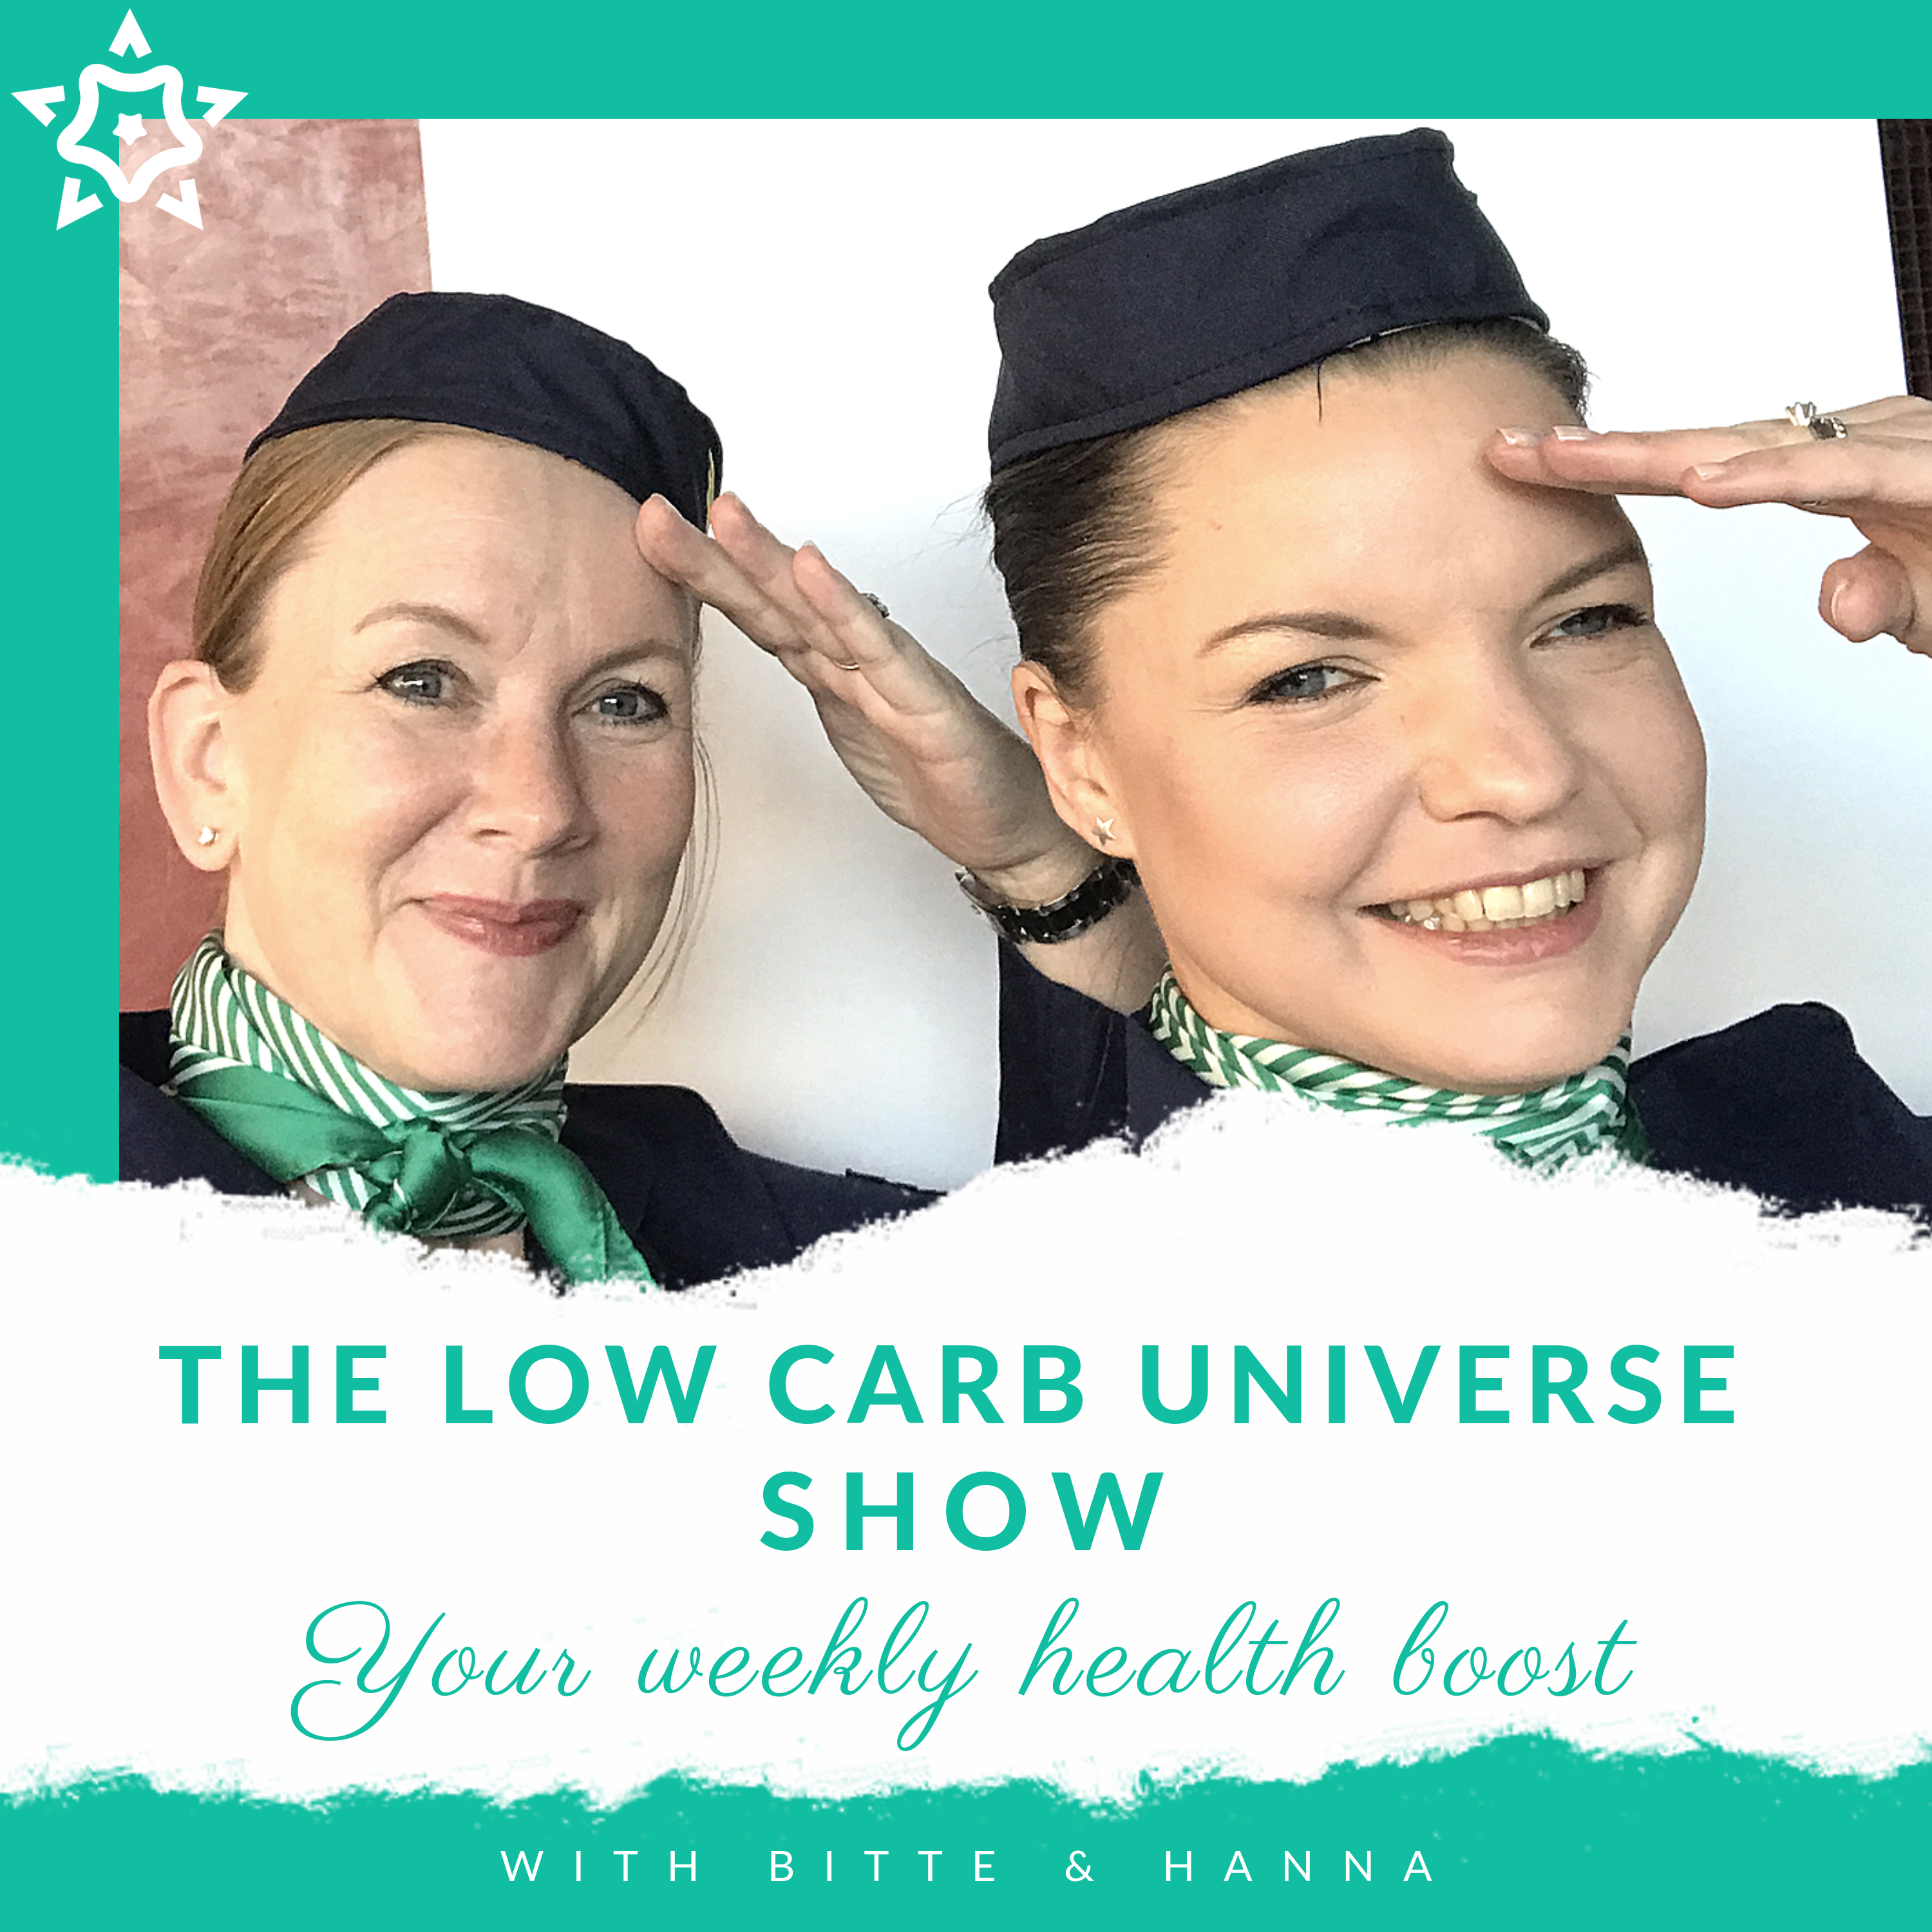 The Low Carb Universe Show